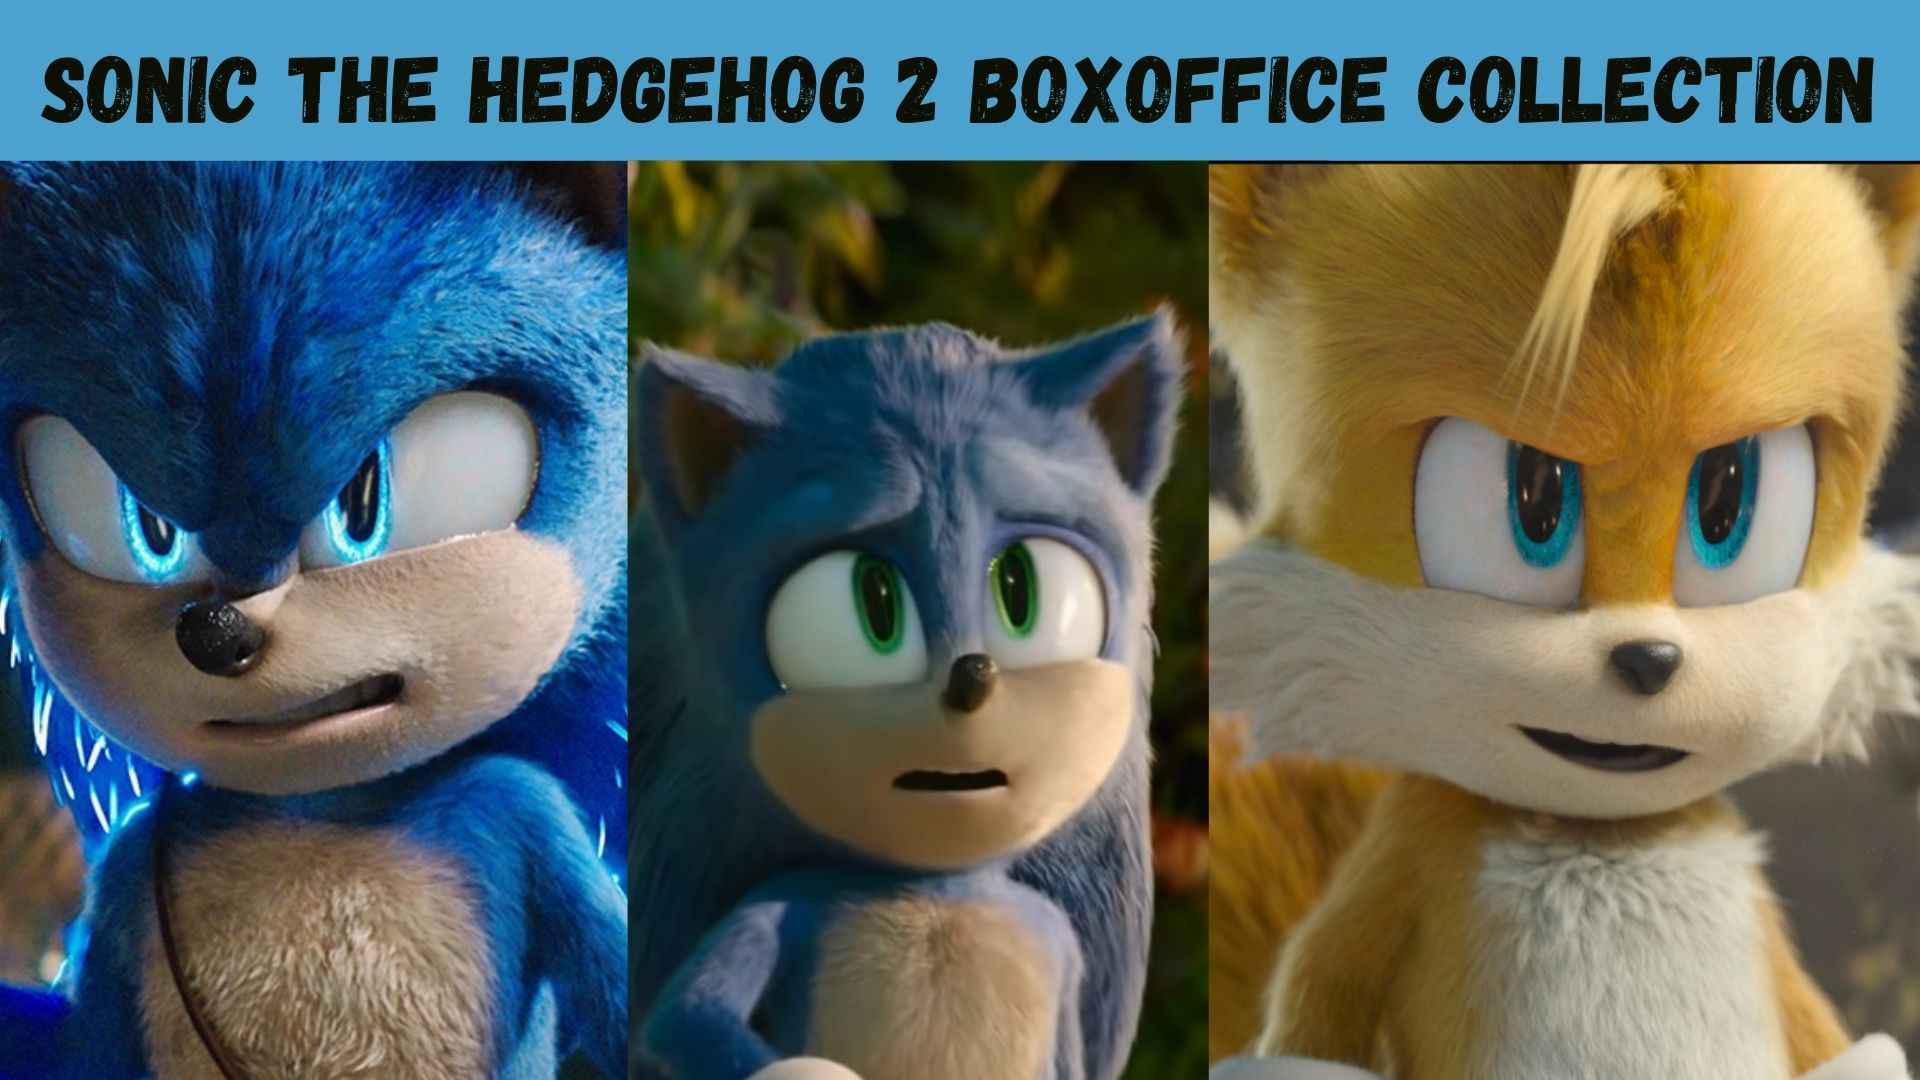 Sonic The Hedgehog 2 Boxoffice Collection wallpaper and images